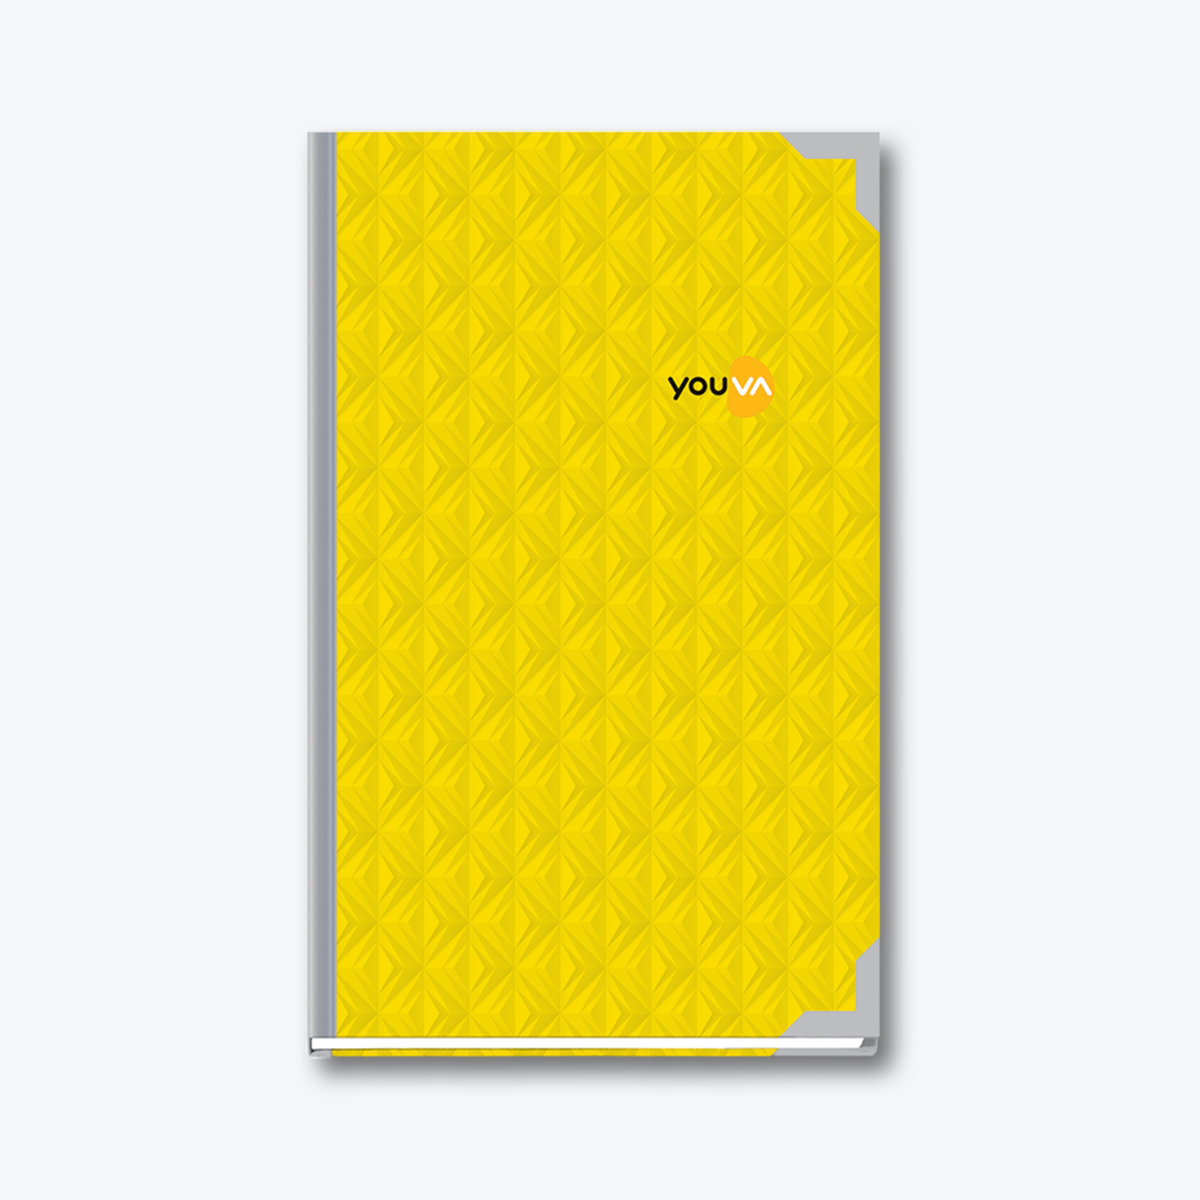 Navneet Youva | My Notes Case Bound / Hard cover Long Book | Foolscap size - 21 cm x 33 cm | For Students, Shops and Office use | Single Line / No Left Margin | 4 Quire Register | 288 Pages | Pack of 1